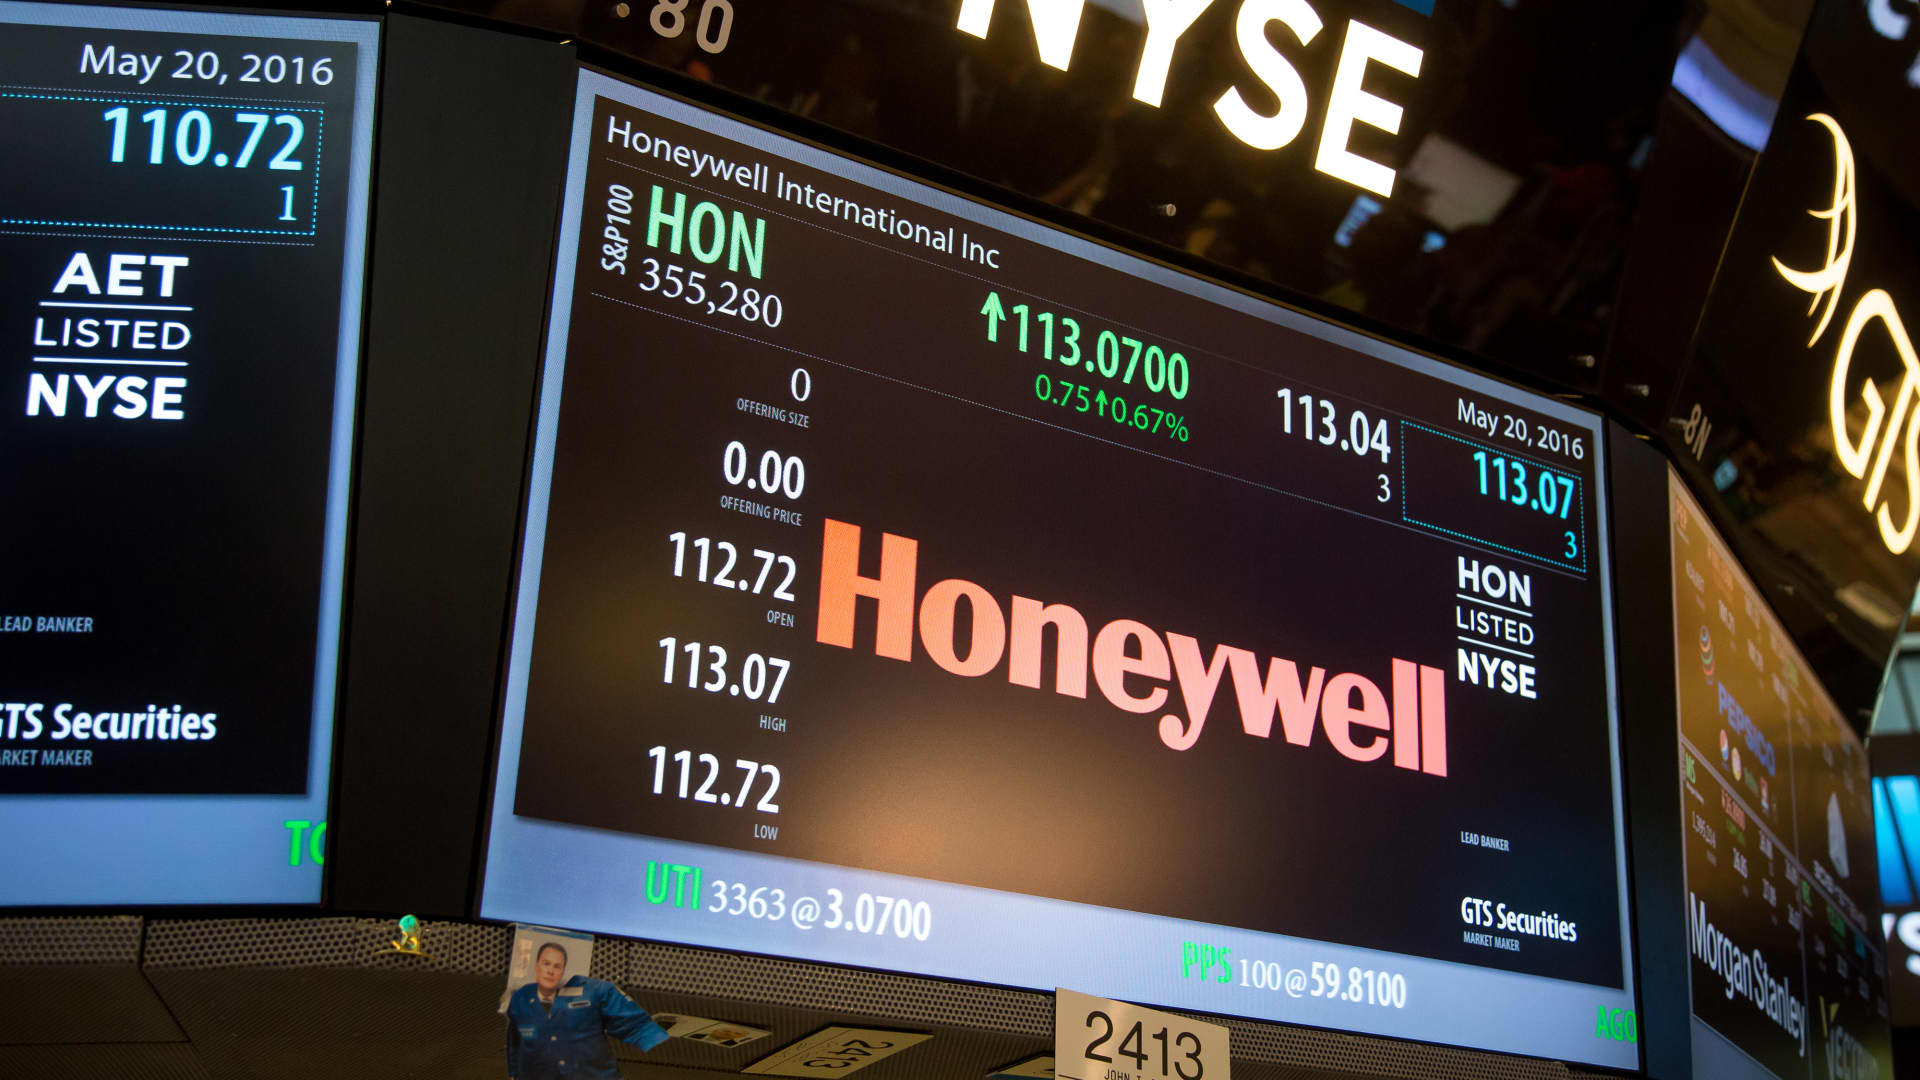 We’re lowering our Honeywell price target after earnings. The risk-reward is still favorable